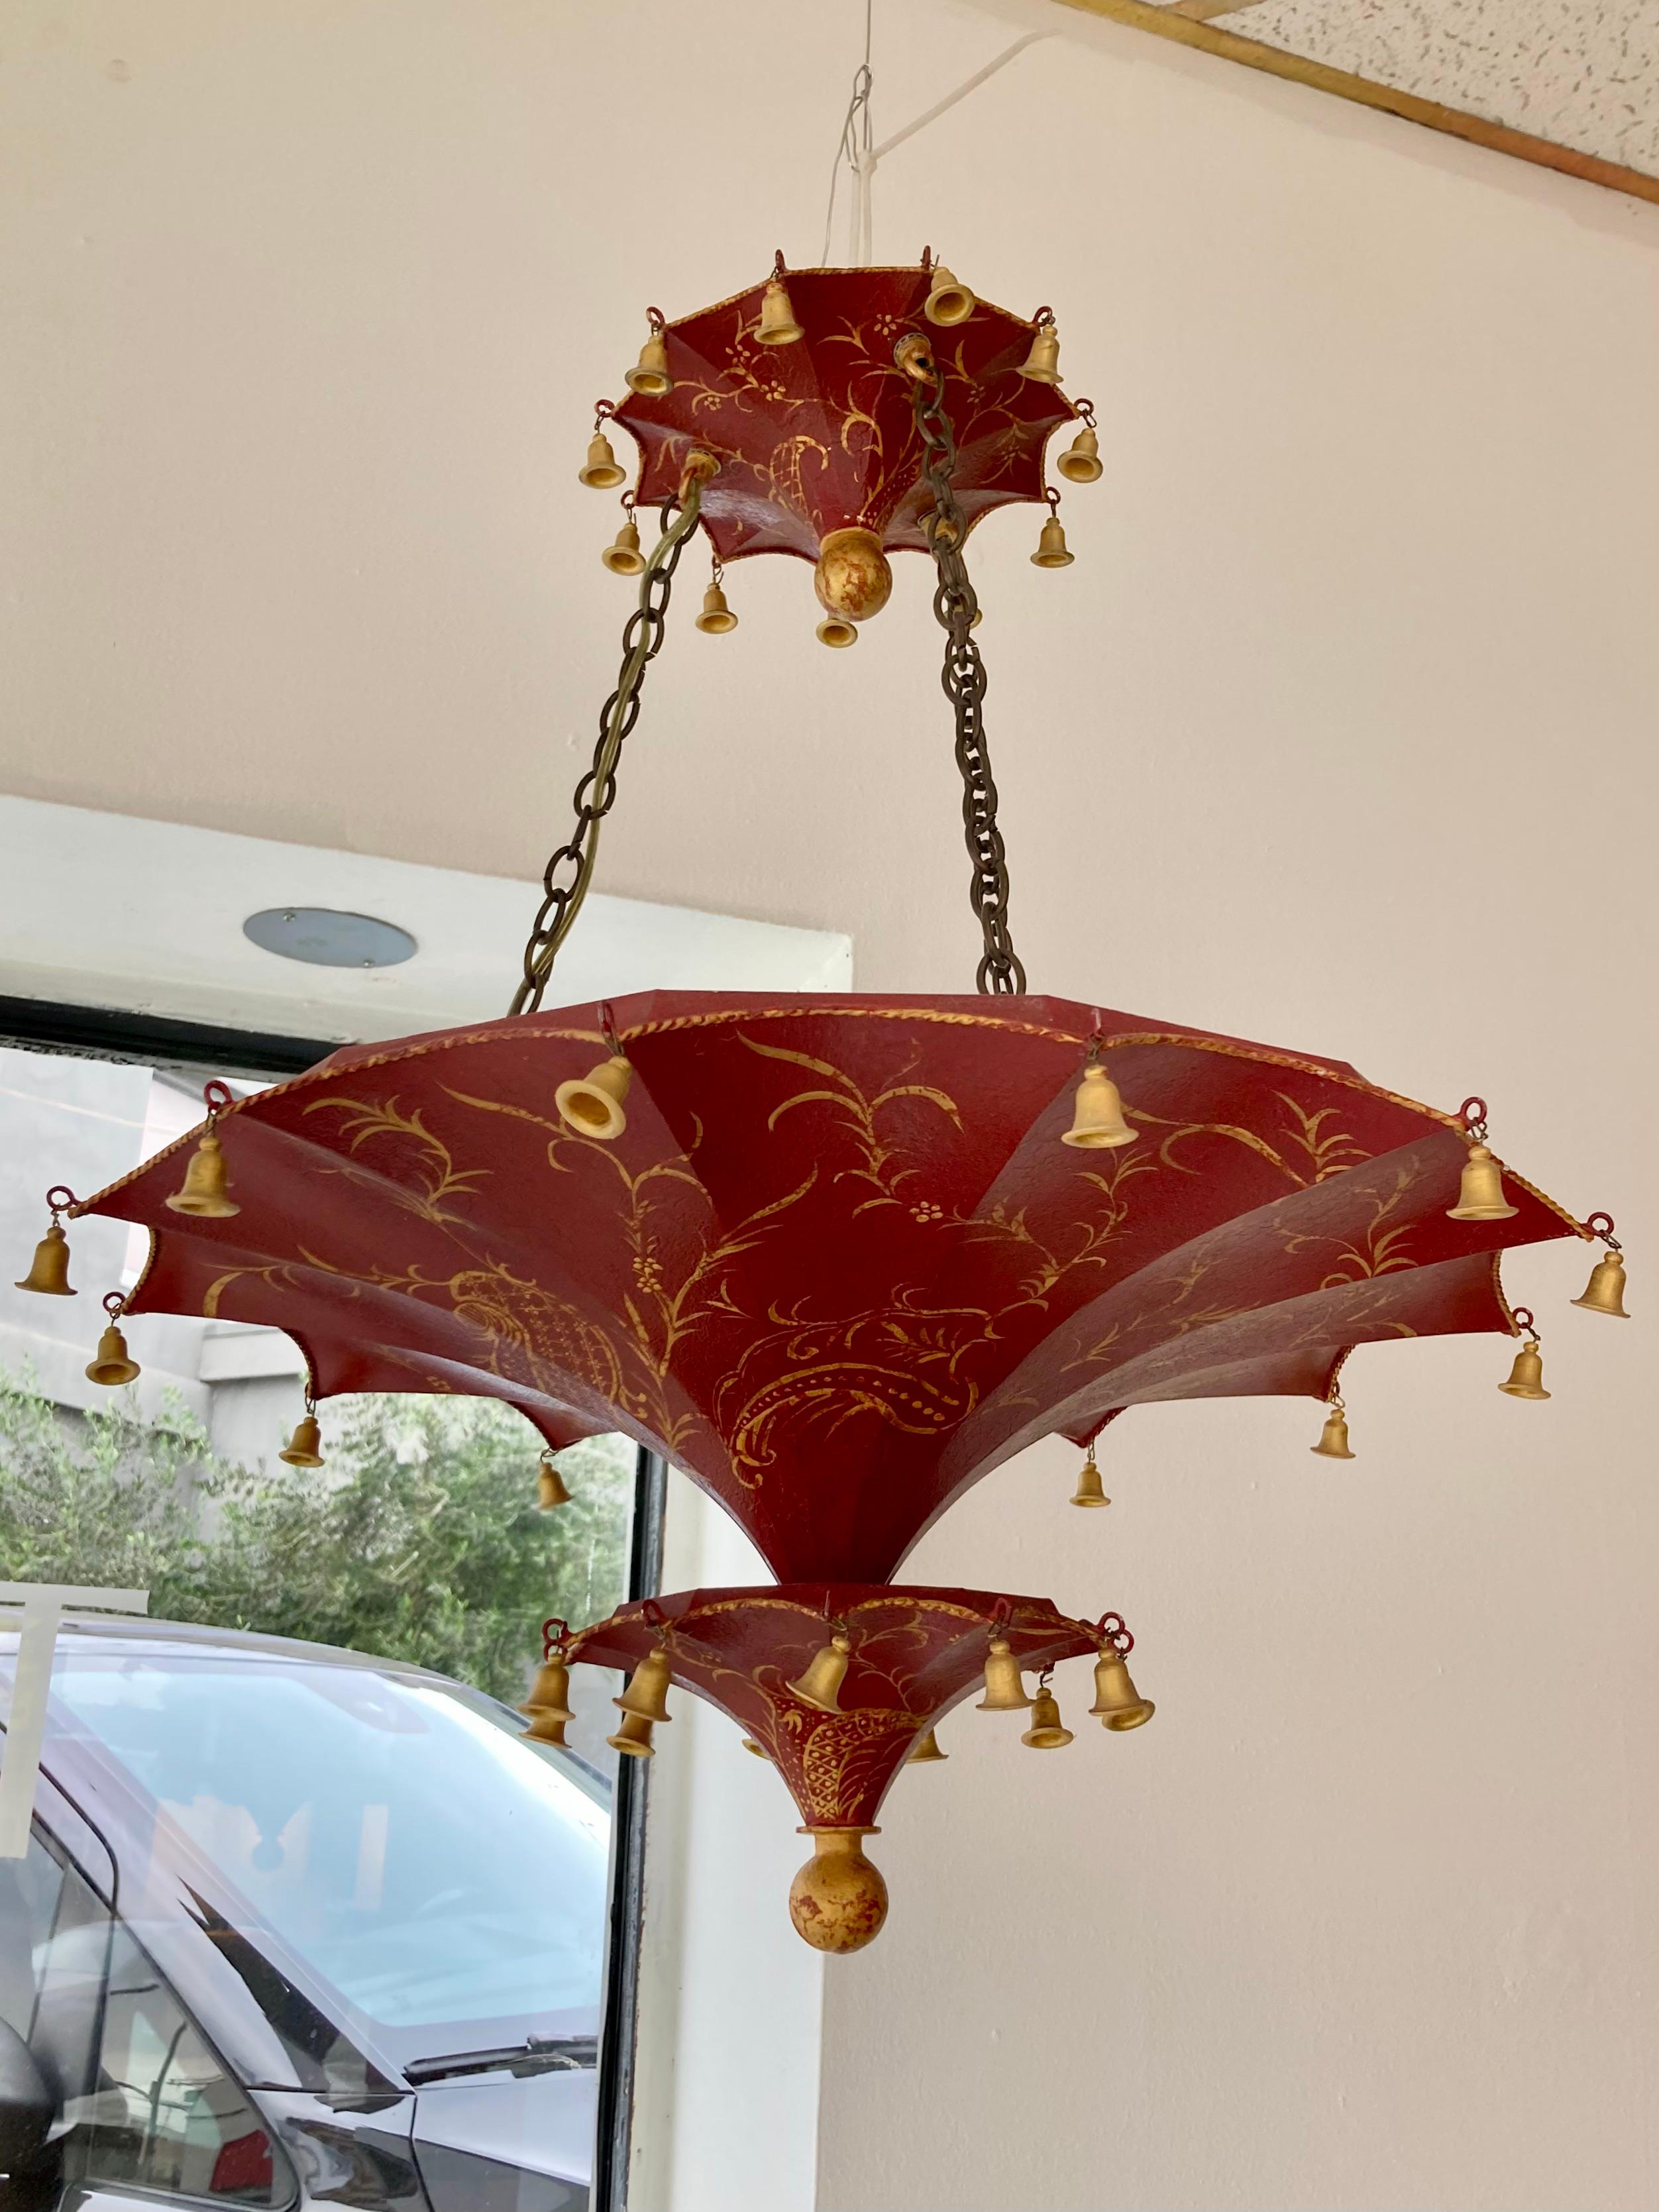 Beautiful pagoda pendant fixture. Add some Chinoiserie style to your home. Incredible details on the shape and also the hand painting works.